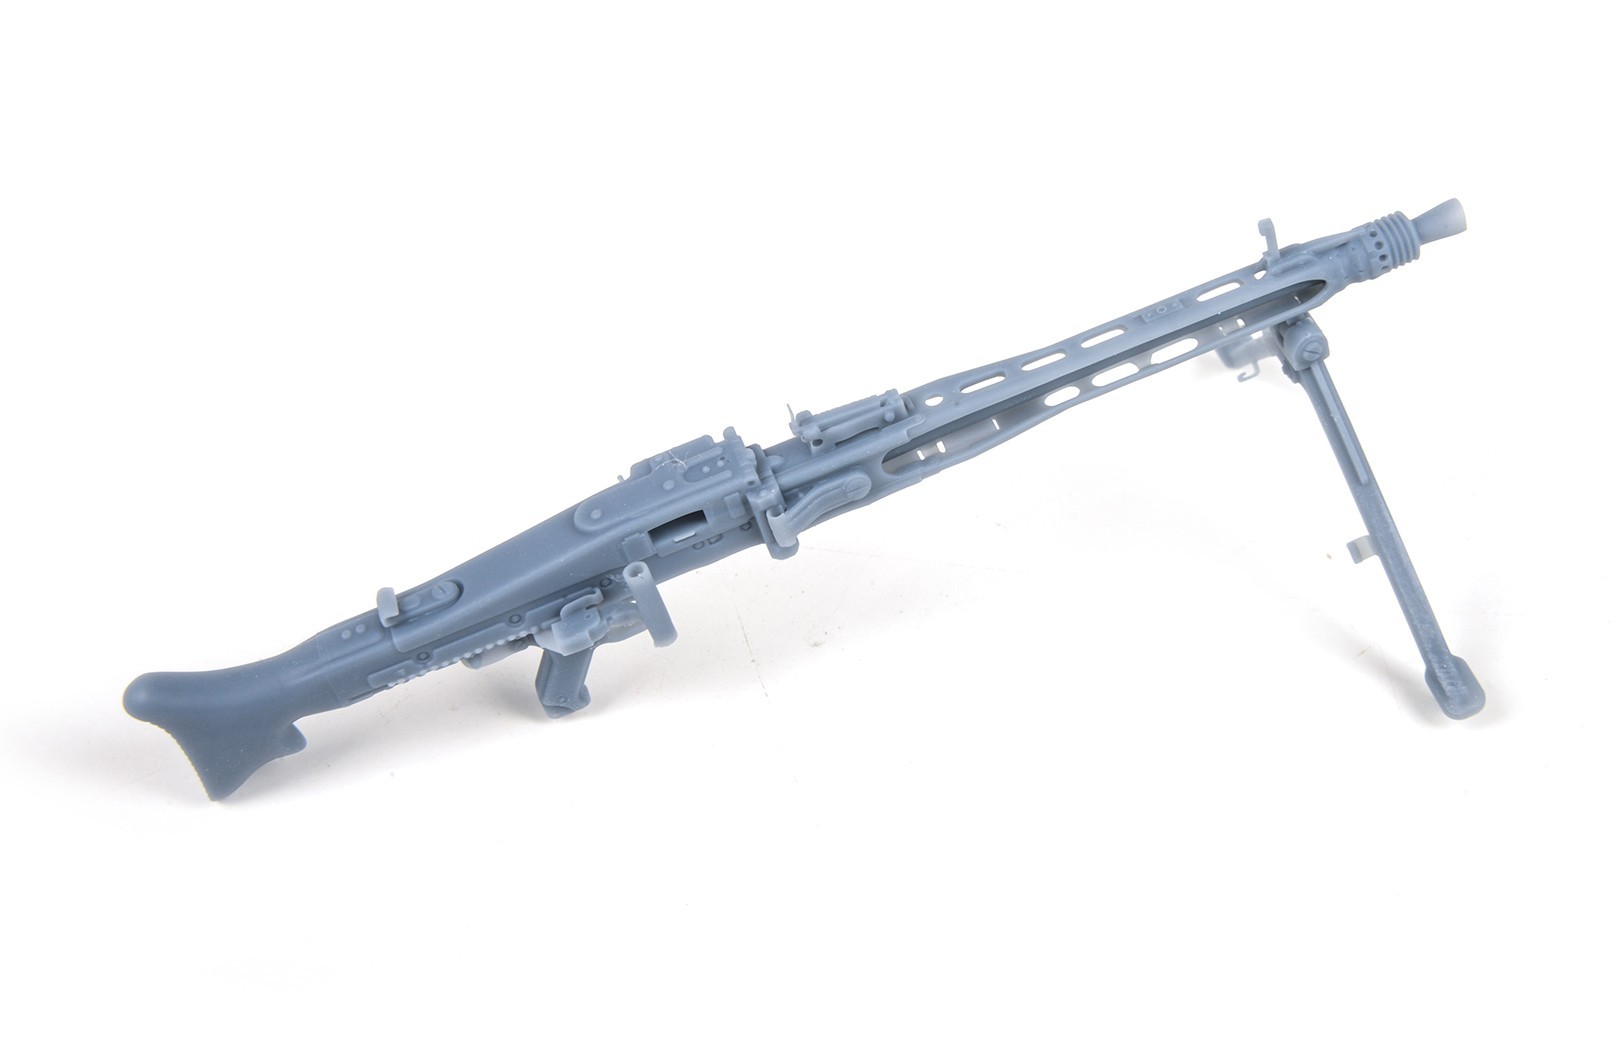 16126 1:16 MG42 Machine Gun with choice of folded and deployed bipod